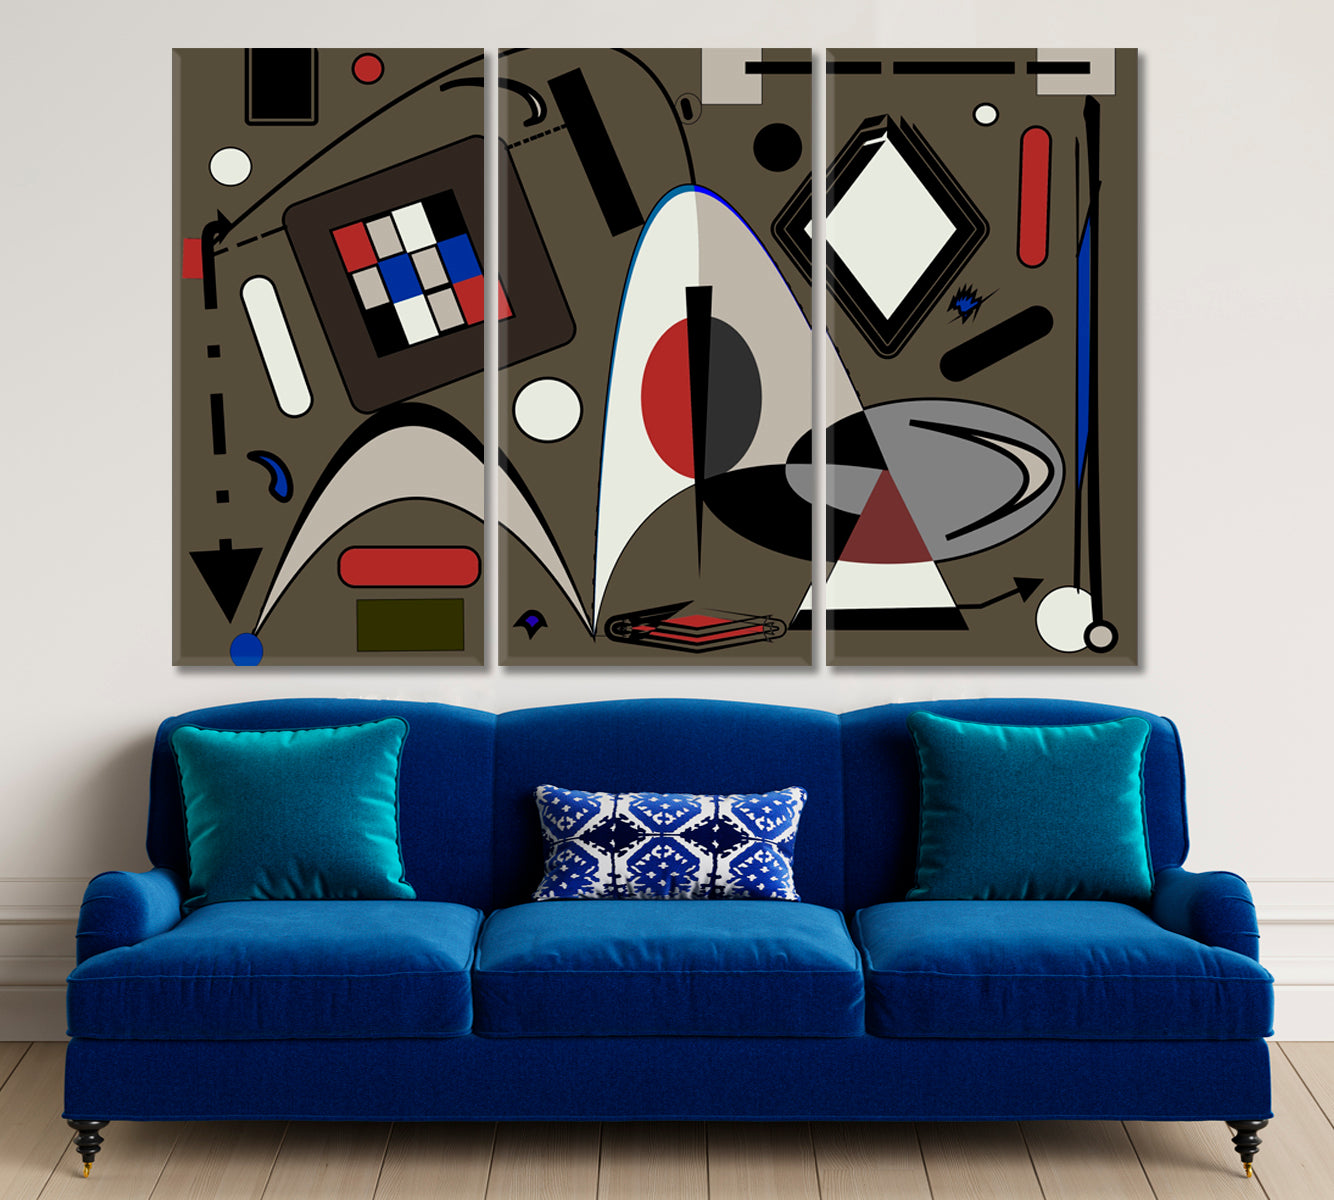 KANDINSKY WORLD Fancy Curved Geometric Shapes Red Brown Tones Abstract Art Print Artesty 3 panels 36" x 24" 